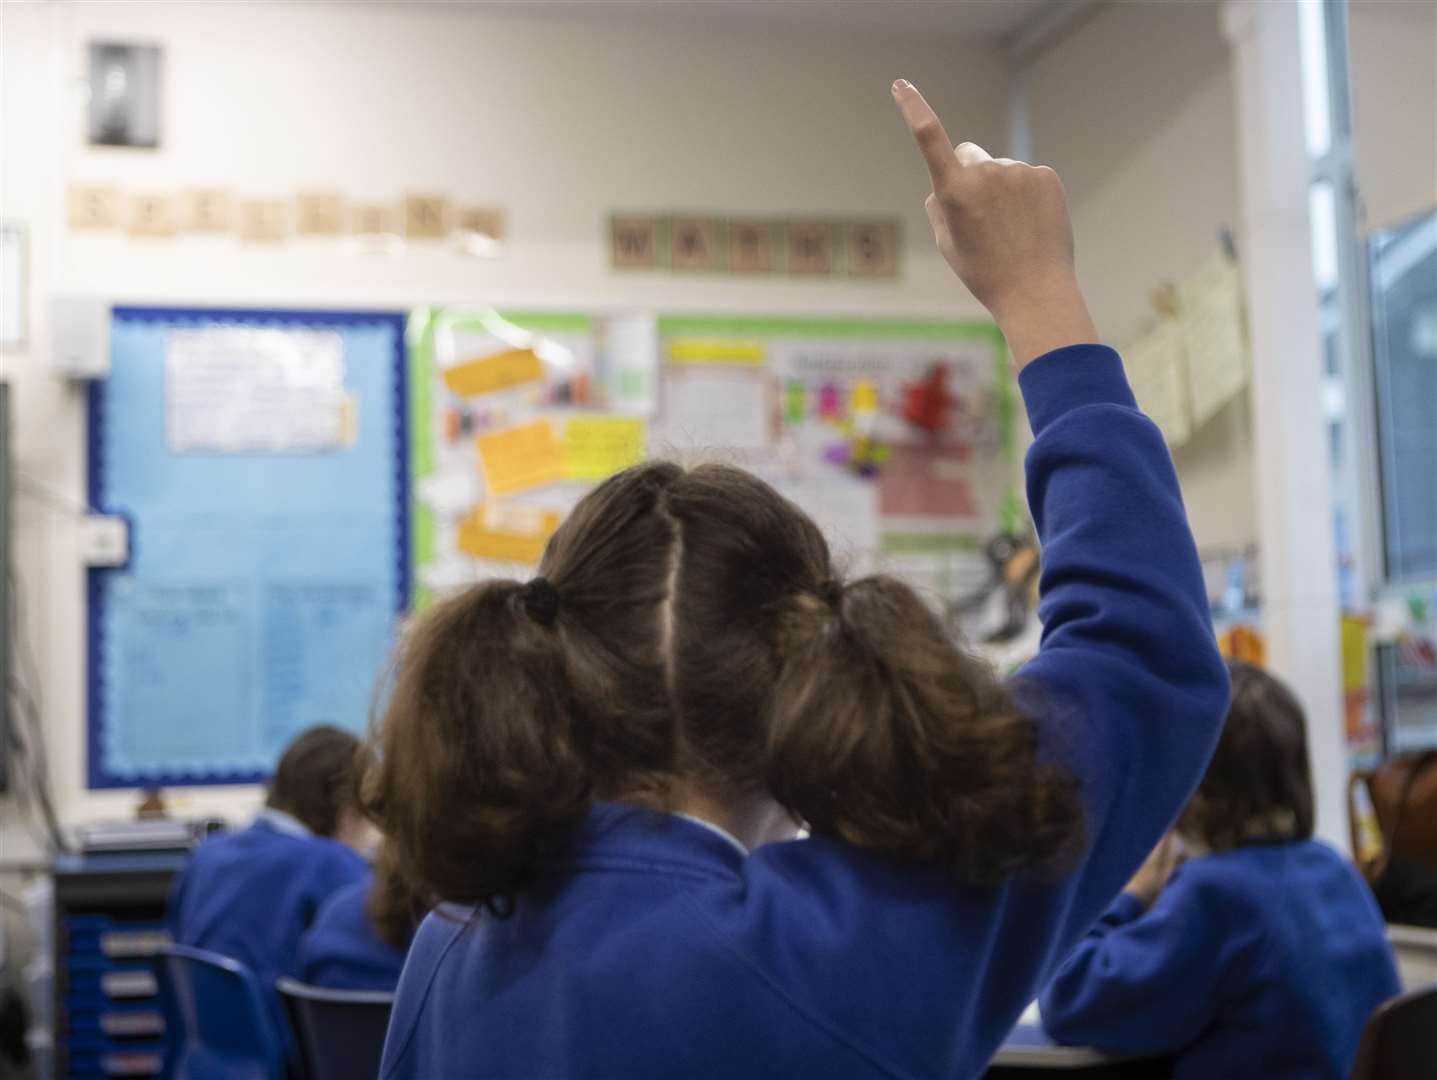 The ASCL said the DfE had ‘failed to listen’ to evidence about pressures facing schools (PA)